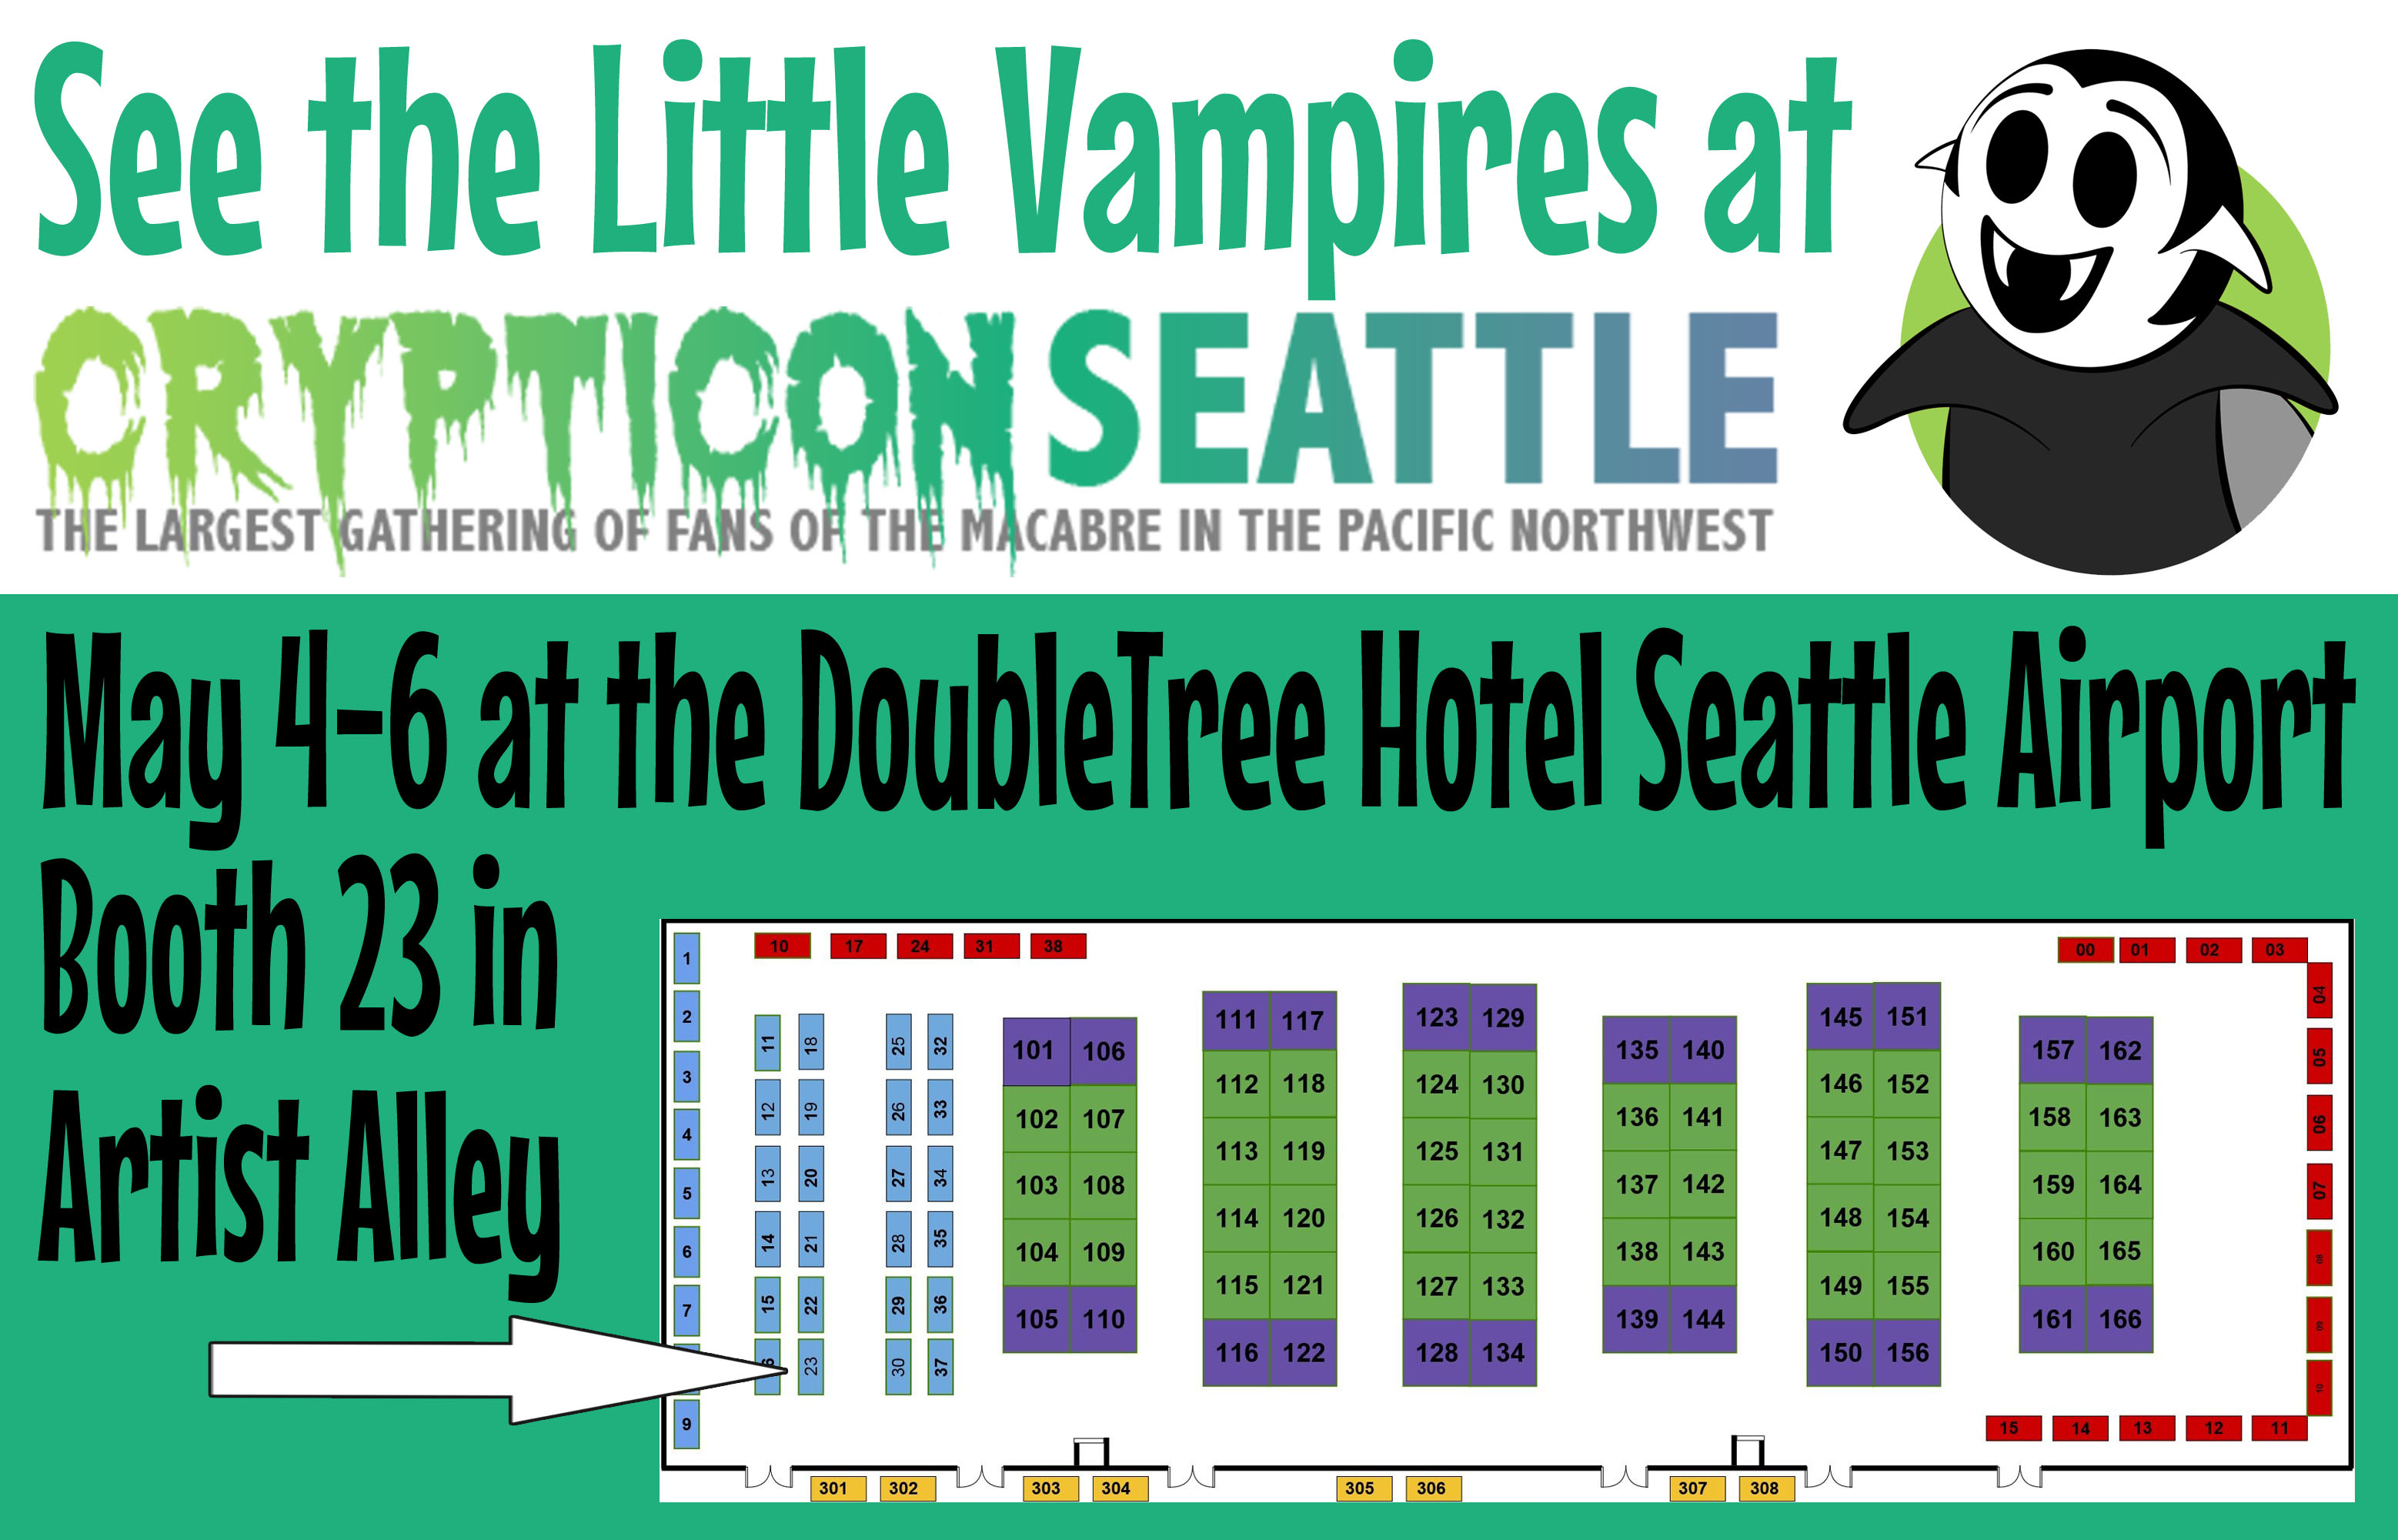 Crypticon Seattle 2018 exhibitor floor map with the Little Vampires booth highlighted